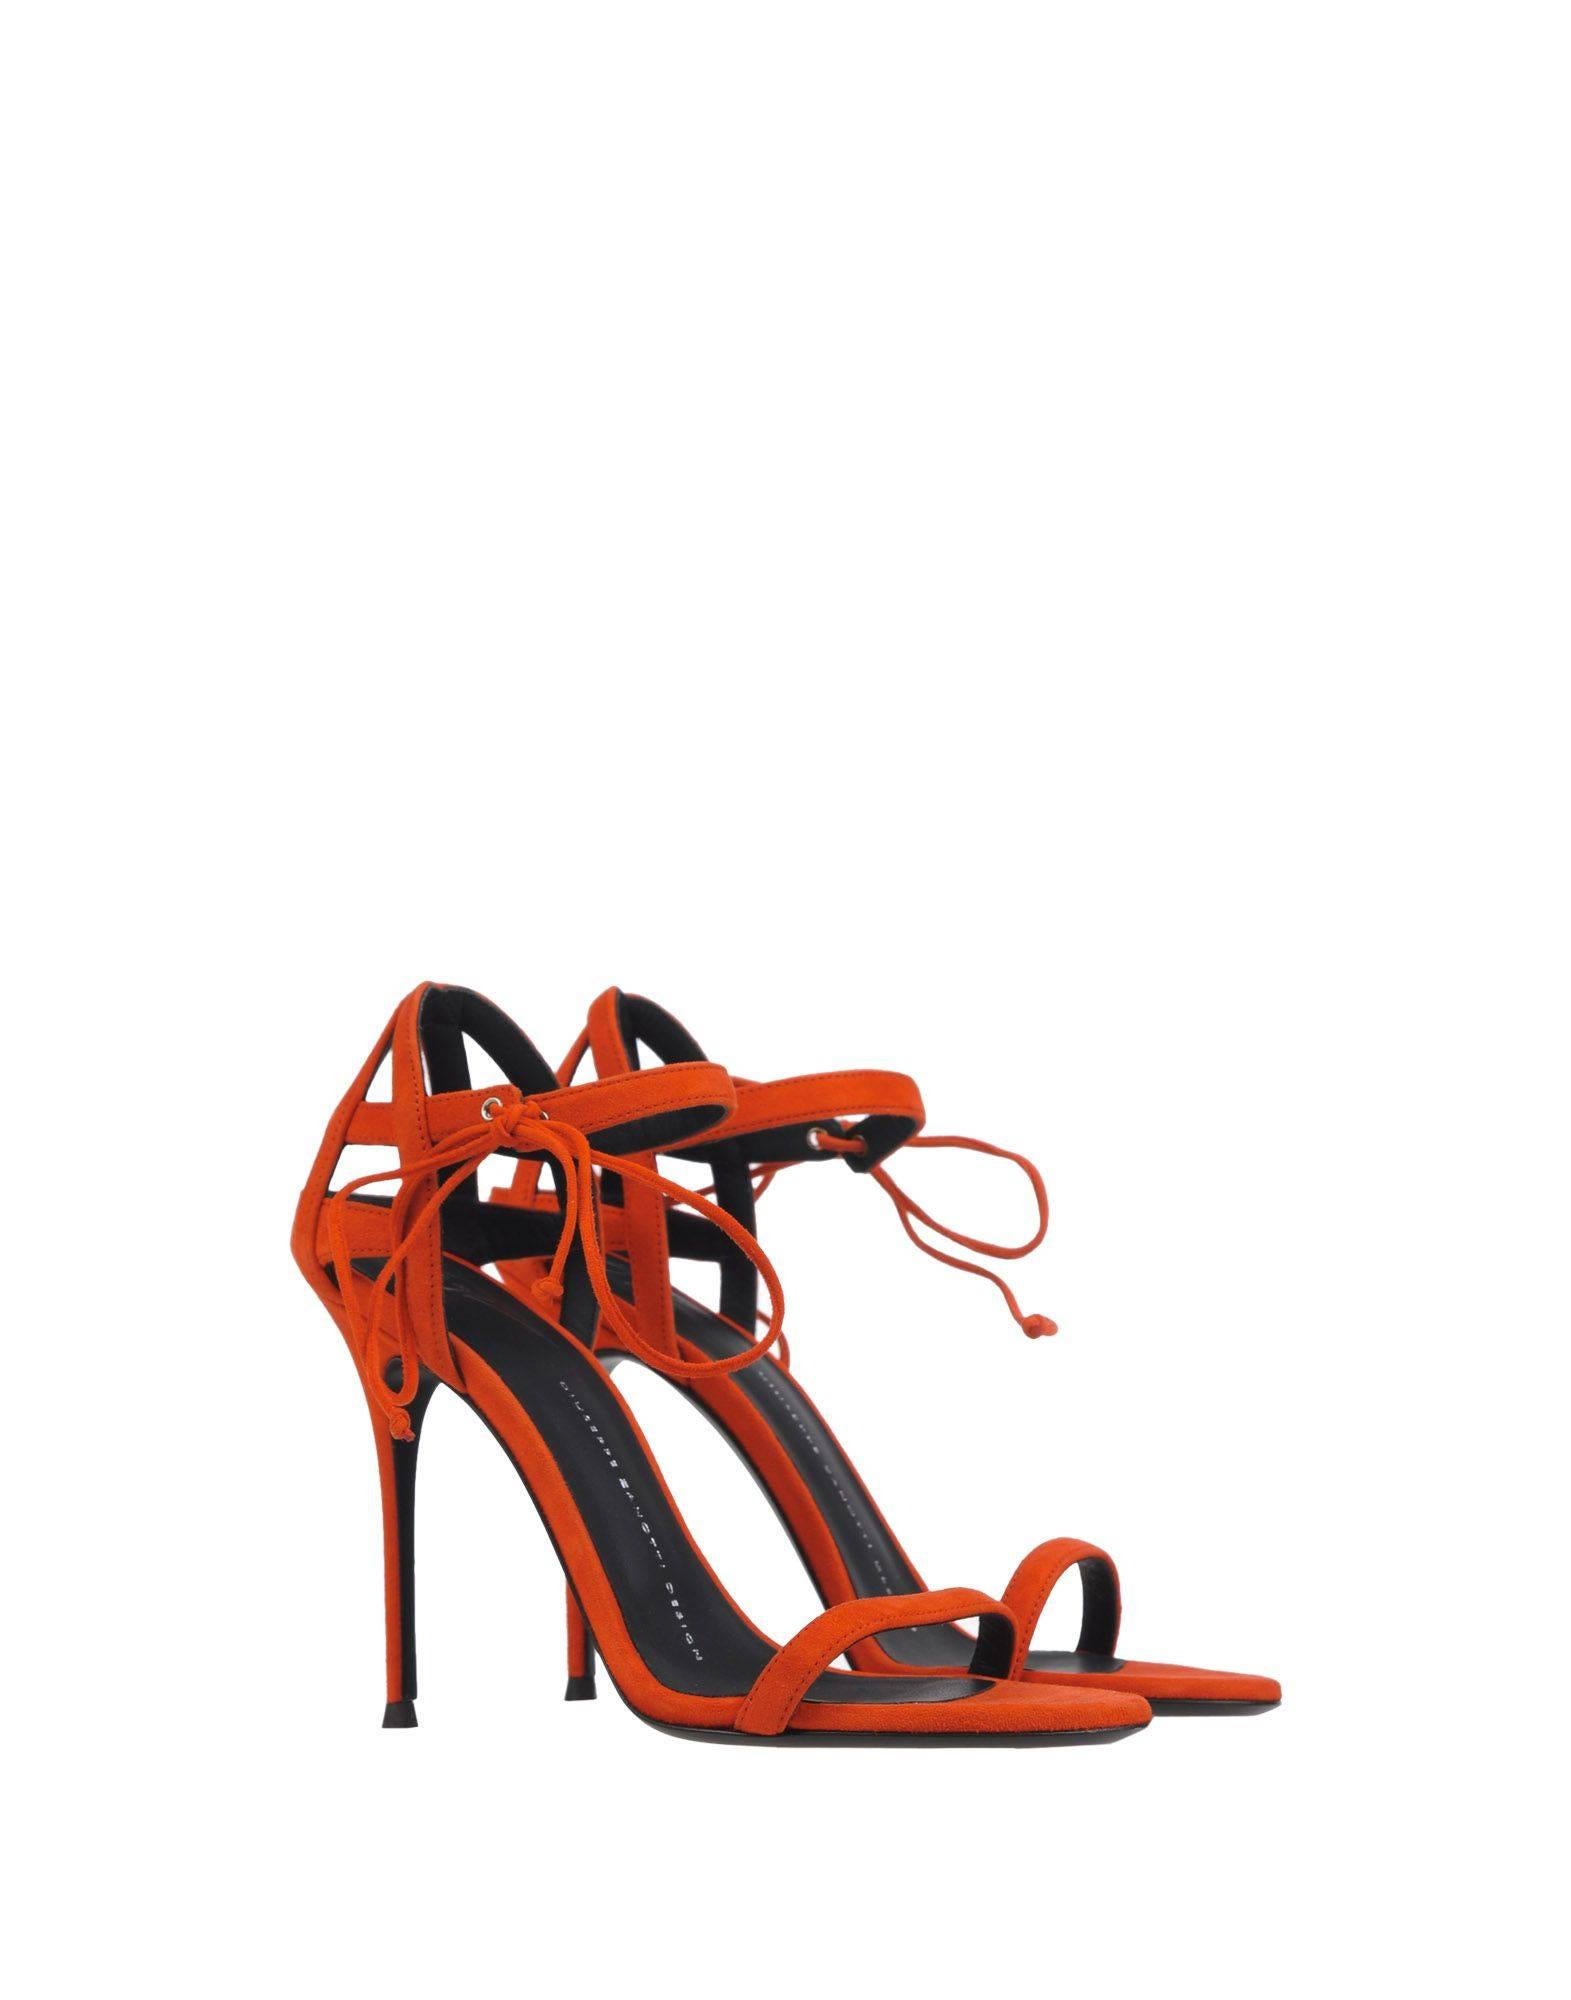 CURATOR'S NOTES

Giuseppe Zanotti New Suede Cage Cut Out Sandals Heels in Box   

Size IT 36.5
Suede
Lace up closure
Made in Italy 
Heel height 4"
Includes original Giuseppe Zanotti box